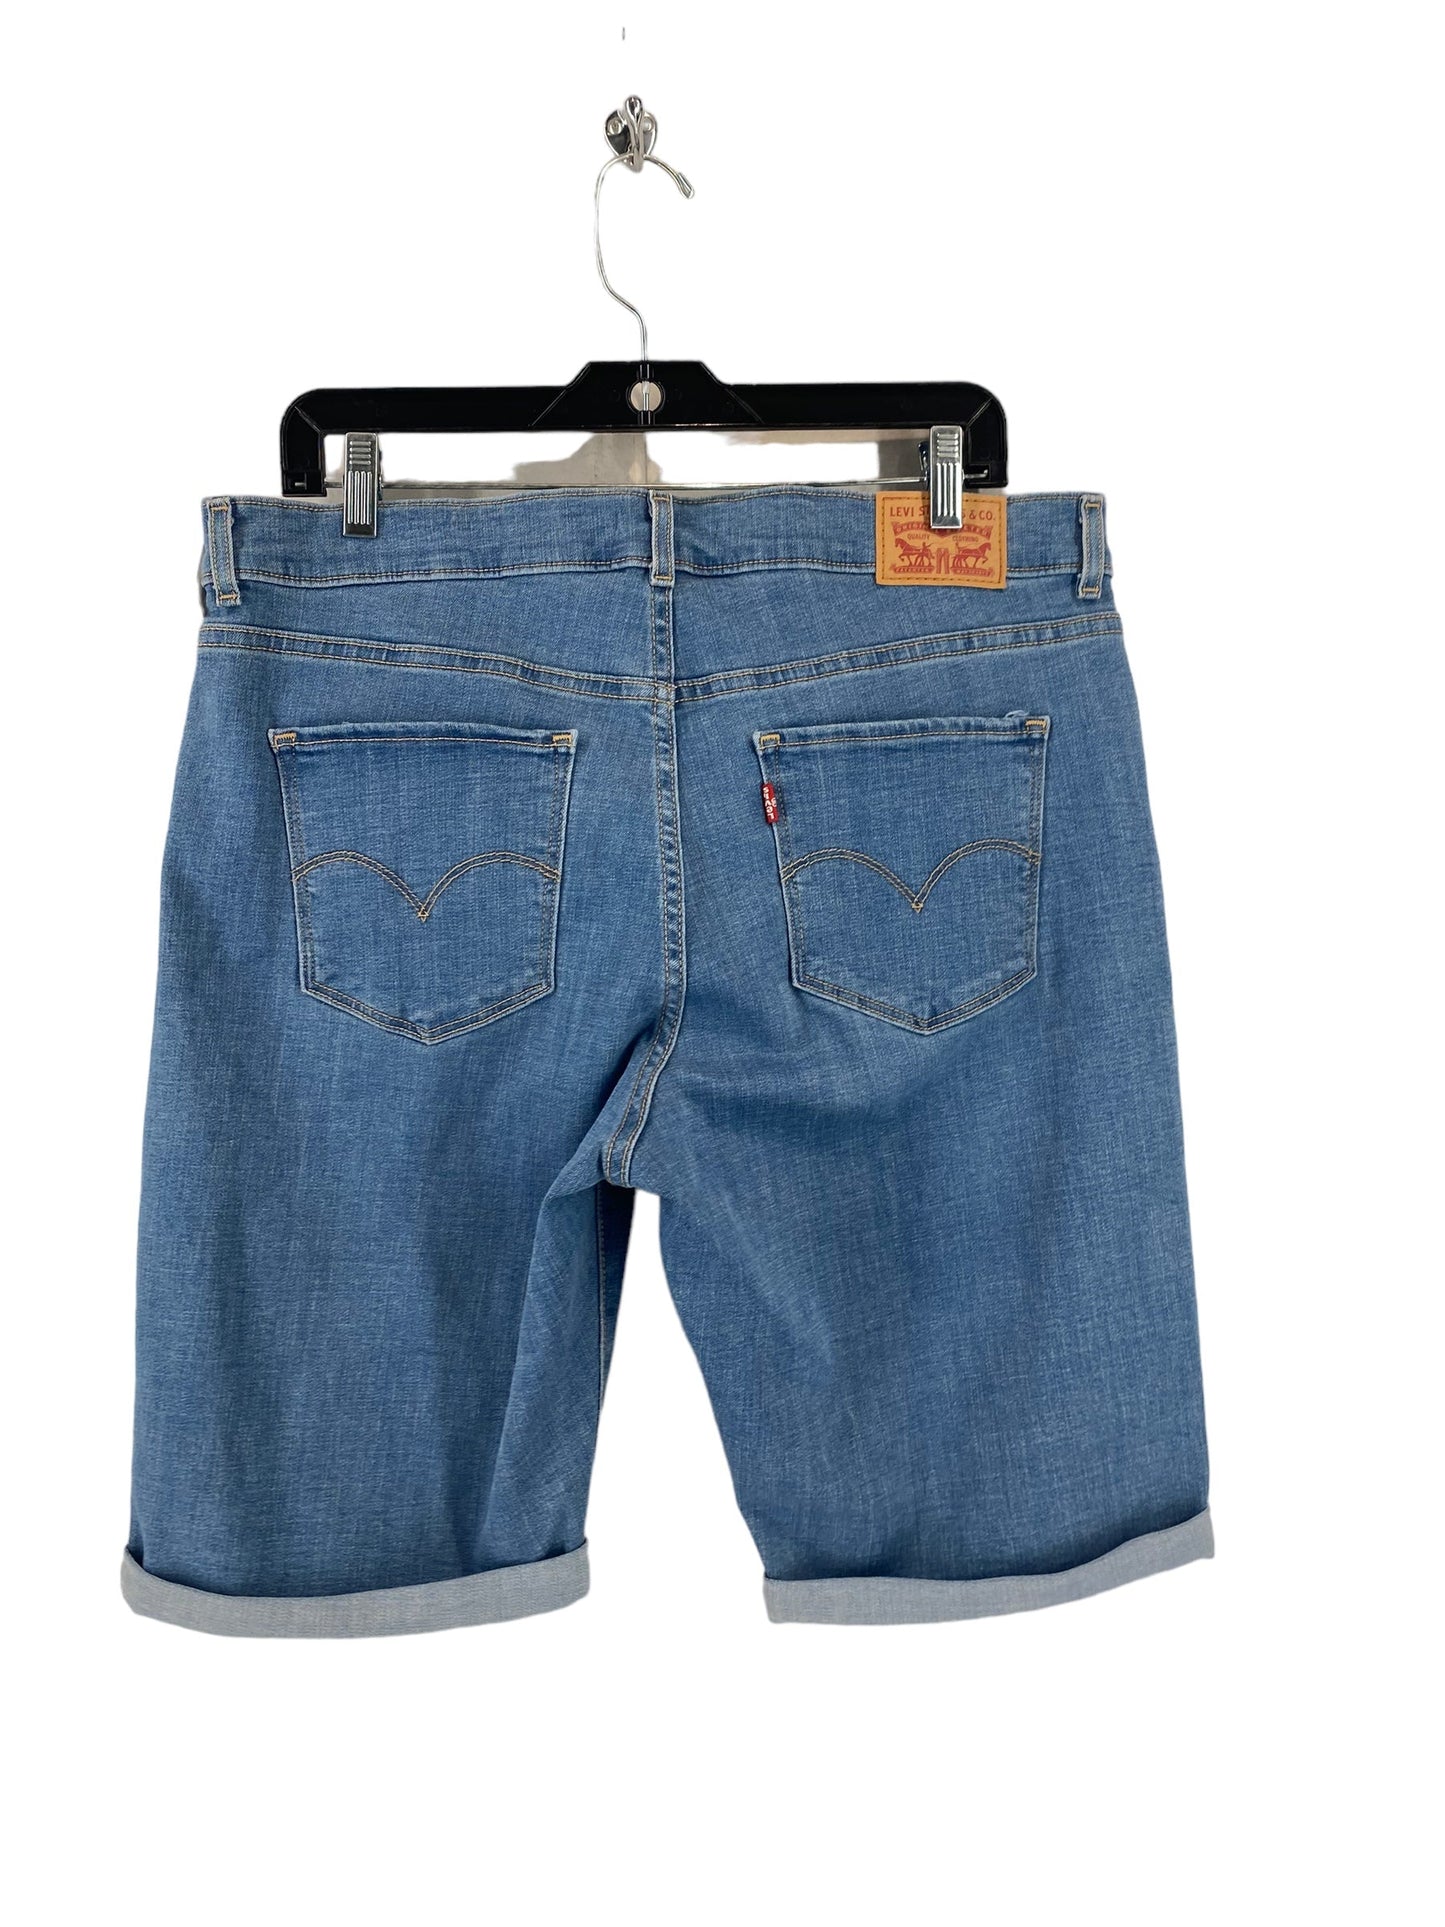 Shorts By Levis  Size: 32